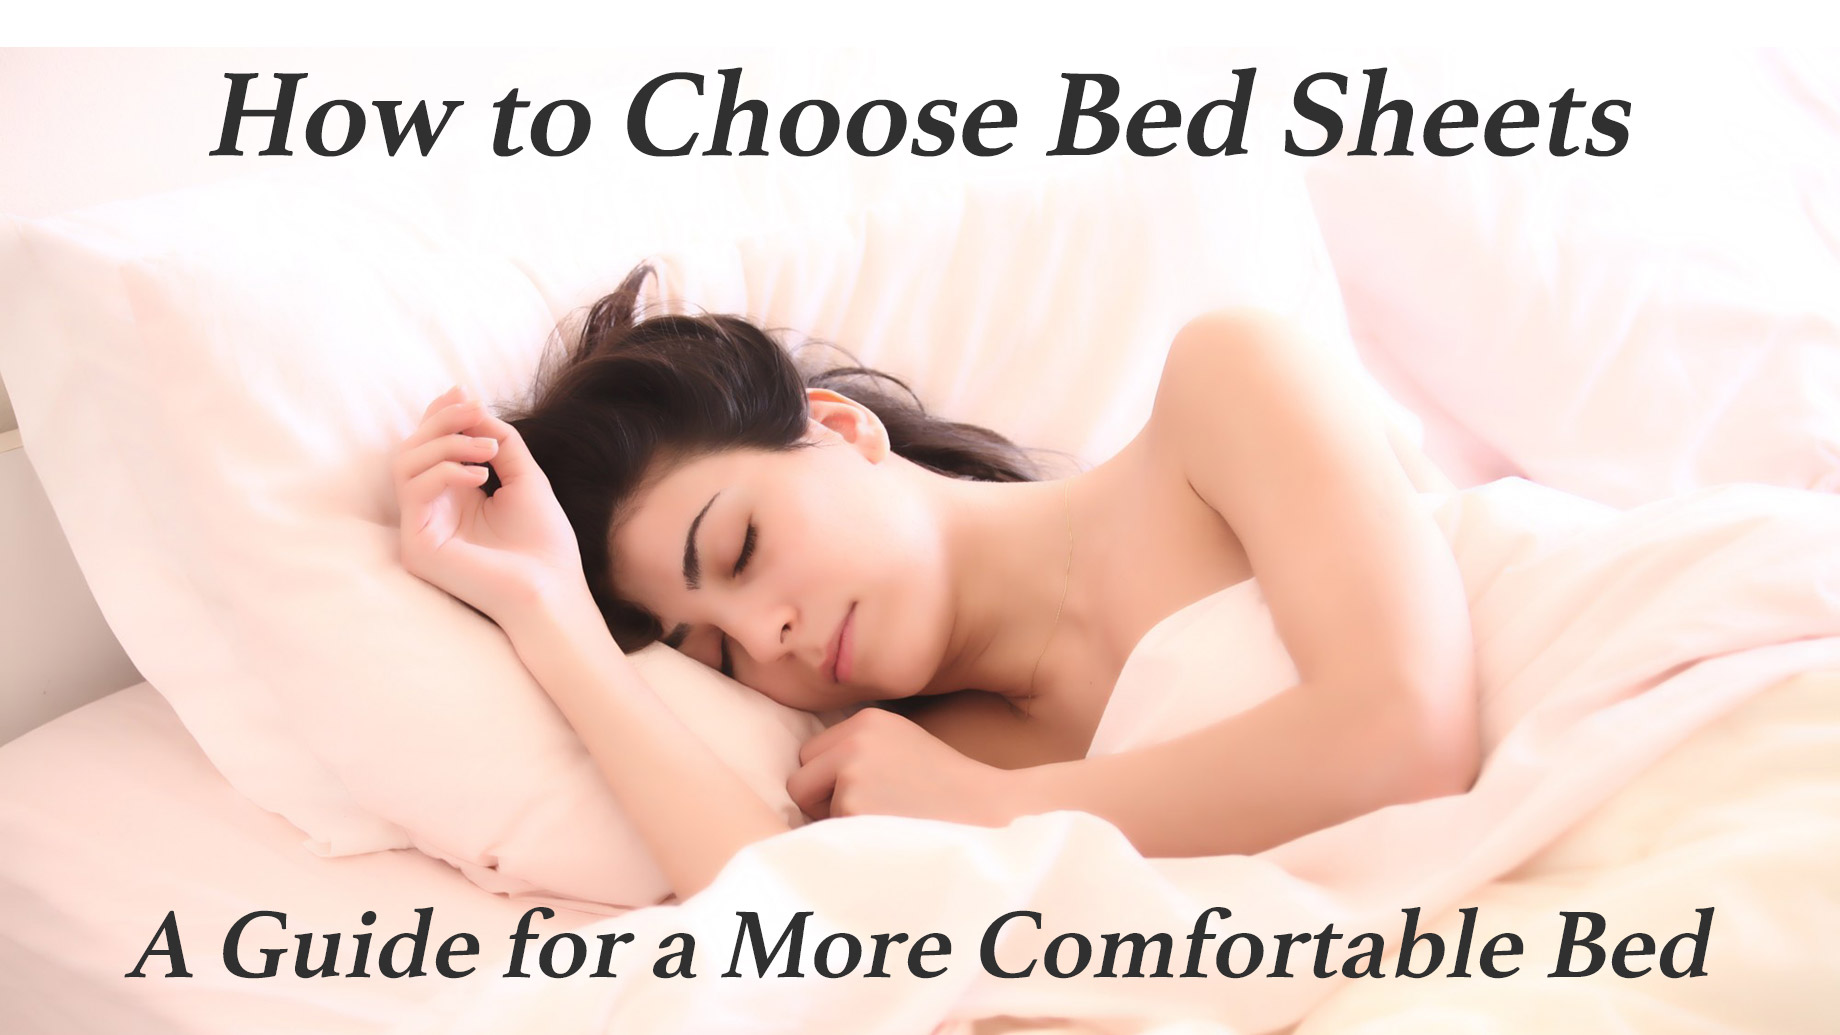 How to Choose Bed Sheets - A Guide for a More Comfortable Bed